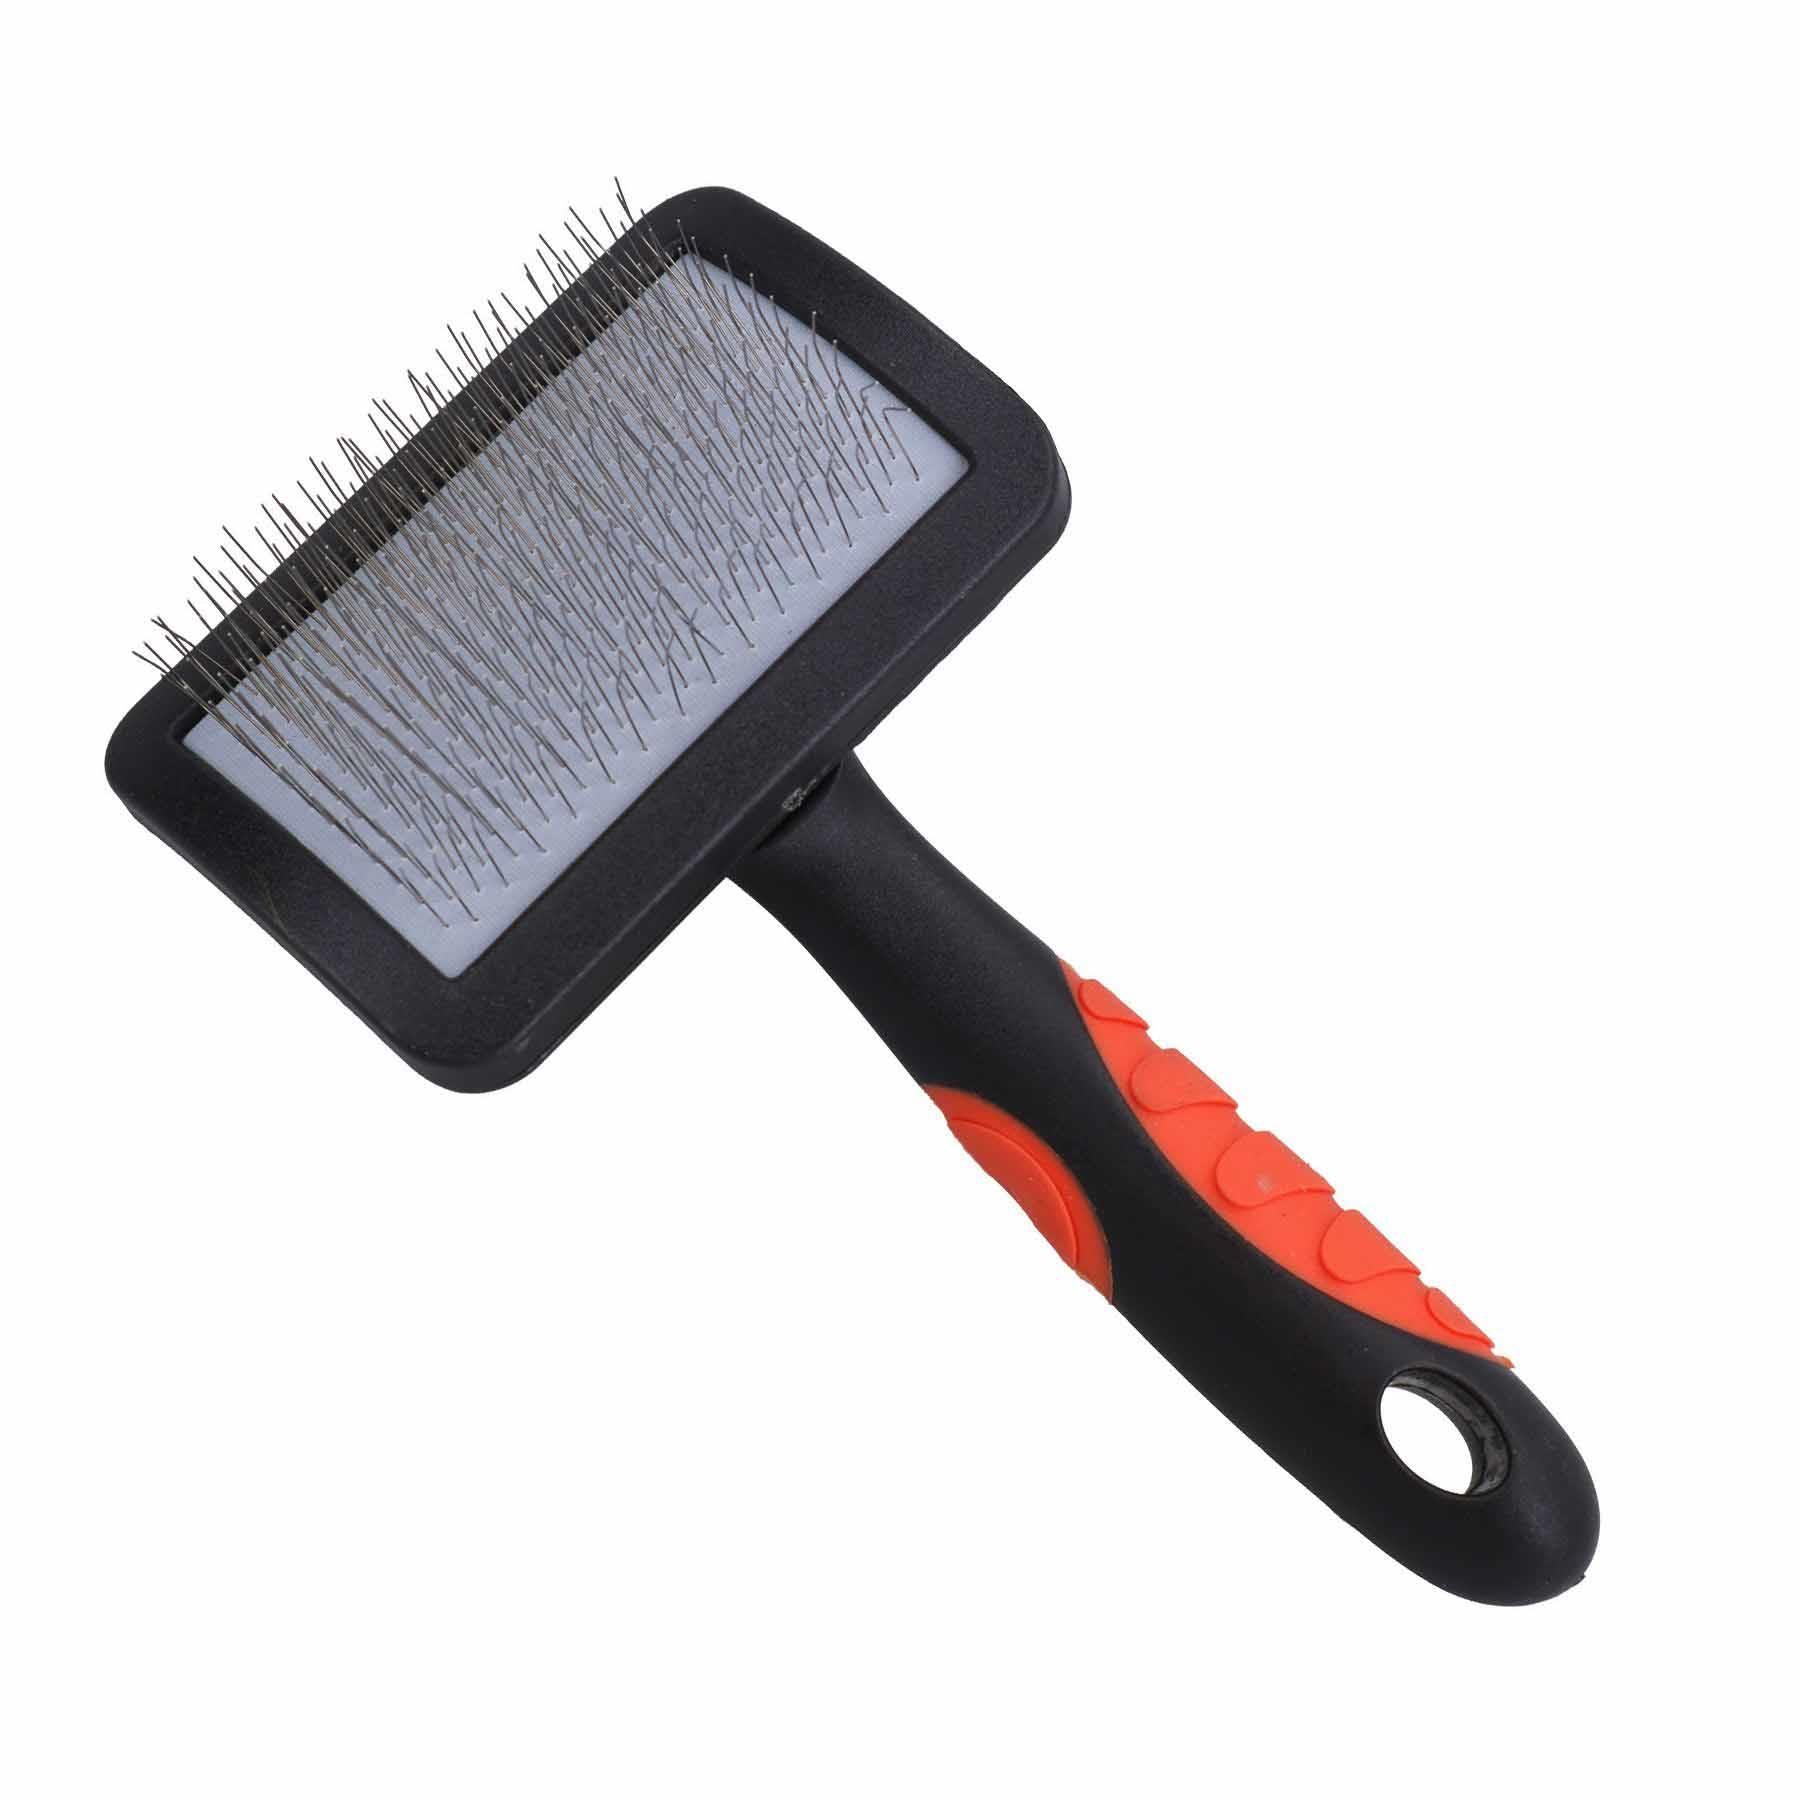 Dog Cat Groom Set: Coarse Comb, Slicker/Double Sided Brush,Scissors, Clippers